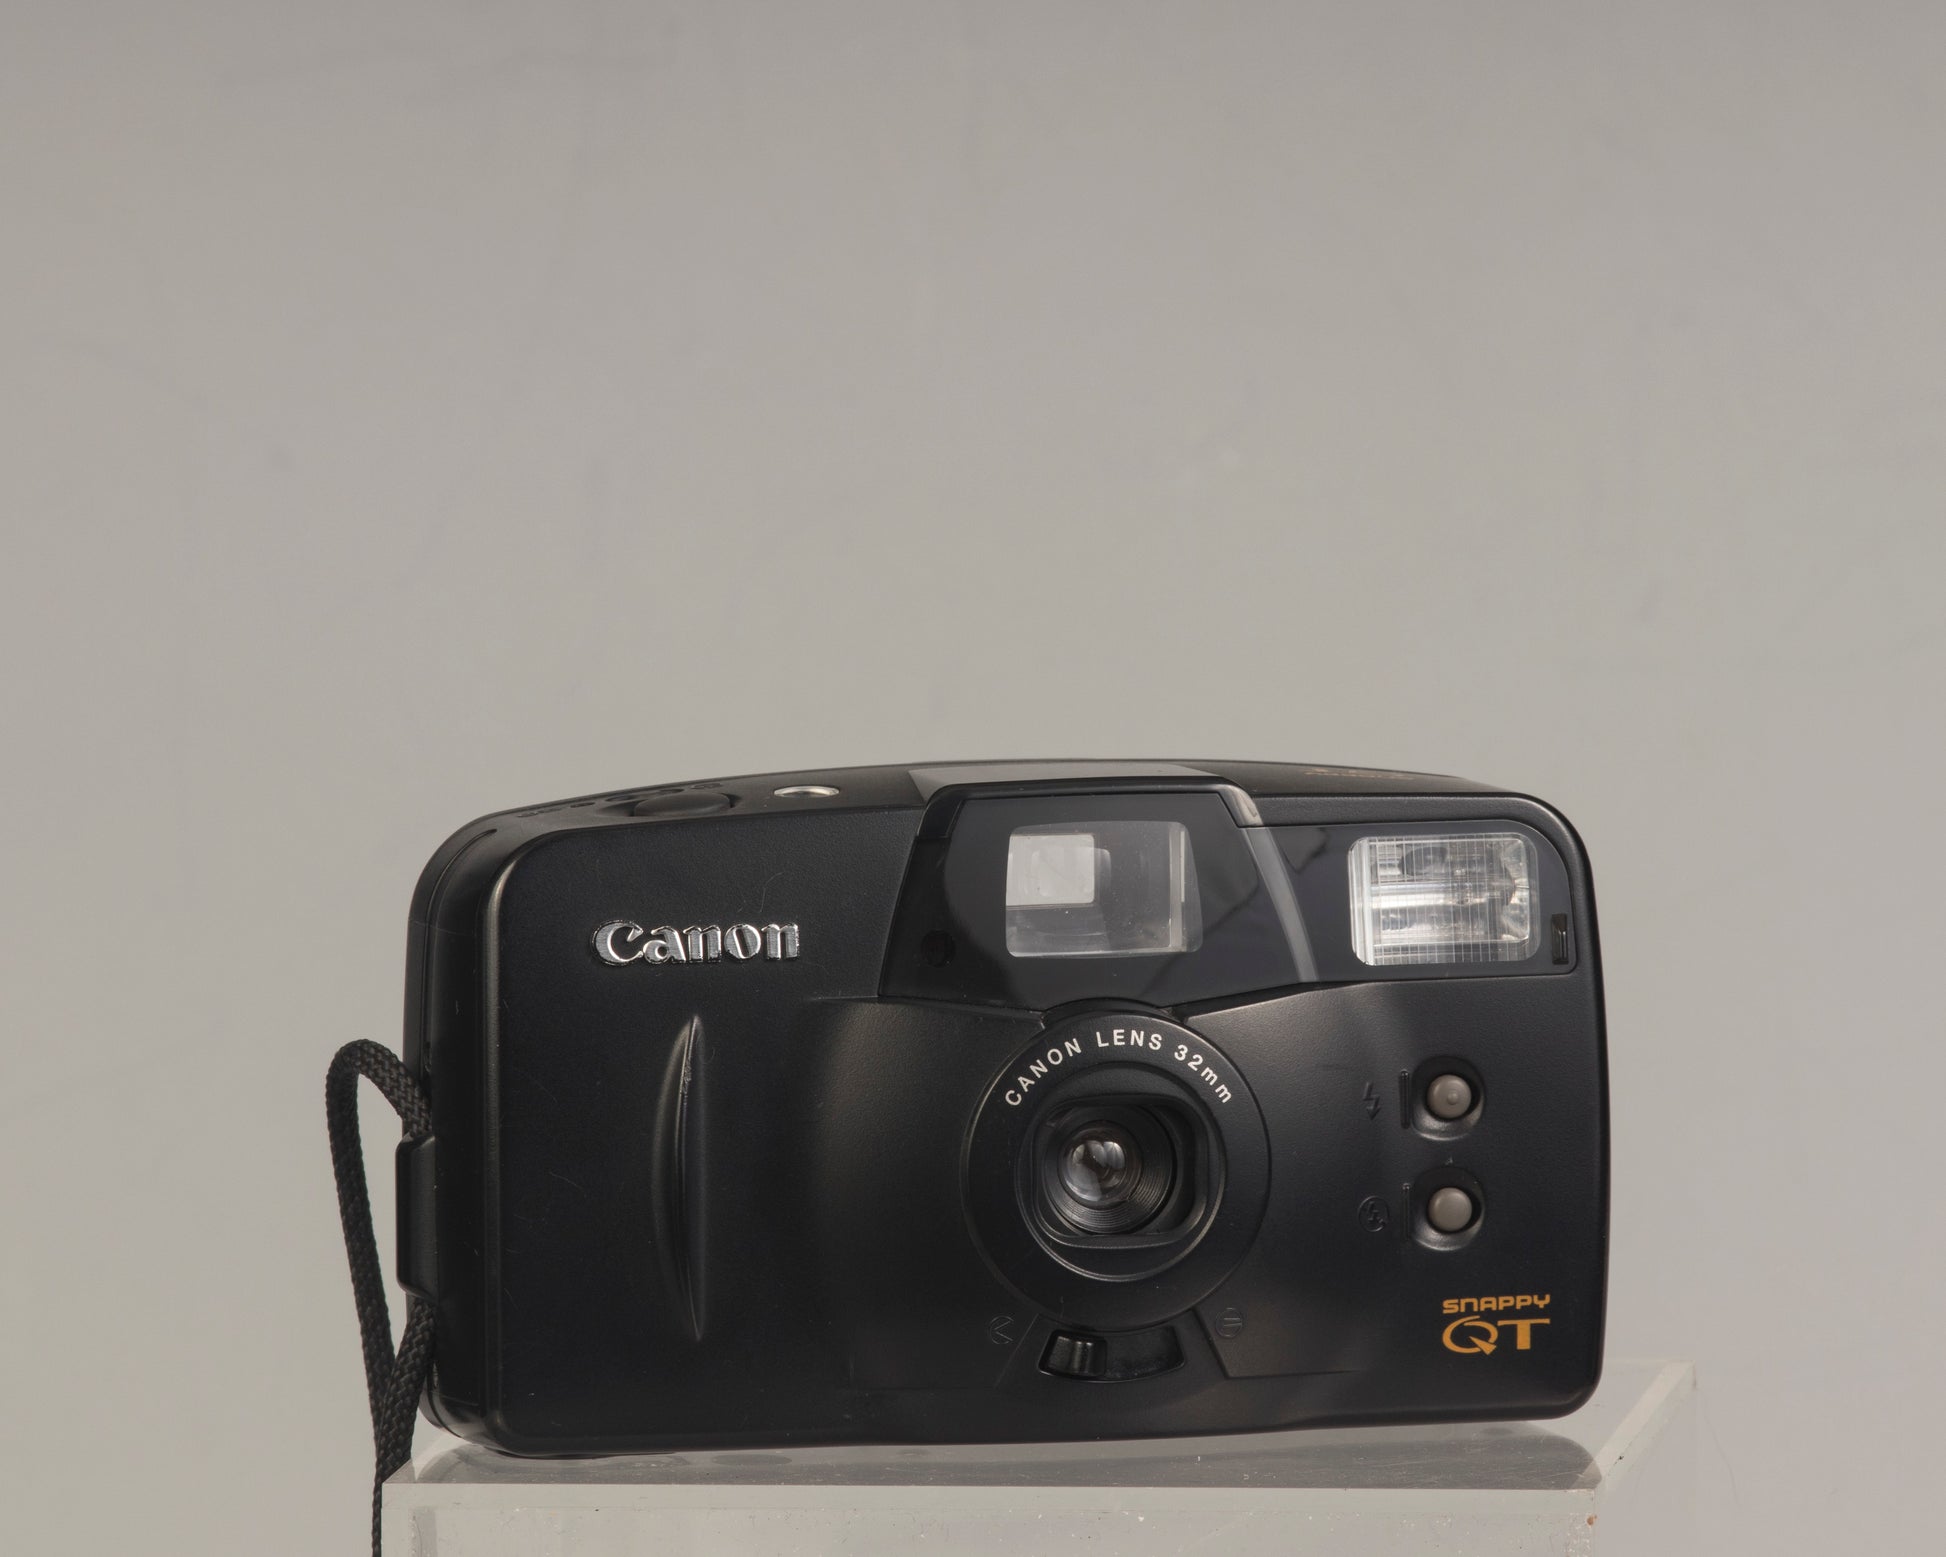 The Canon Snappy QT is a 35mm film point-and-shoot camera featuring a 32mm lens and an unusually large and bright viewfinder.